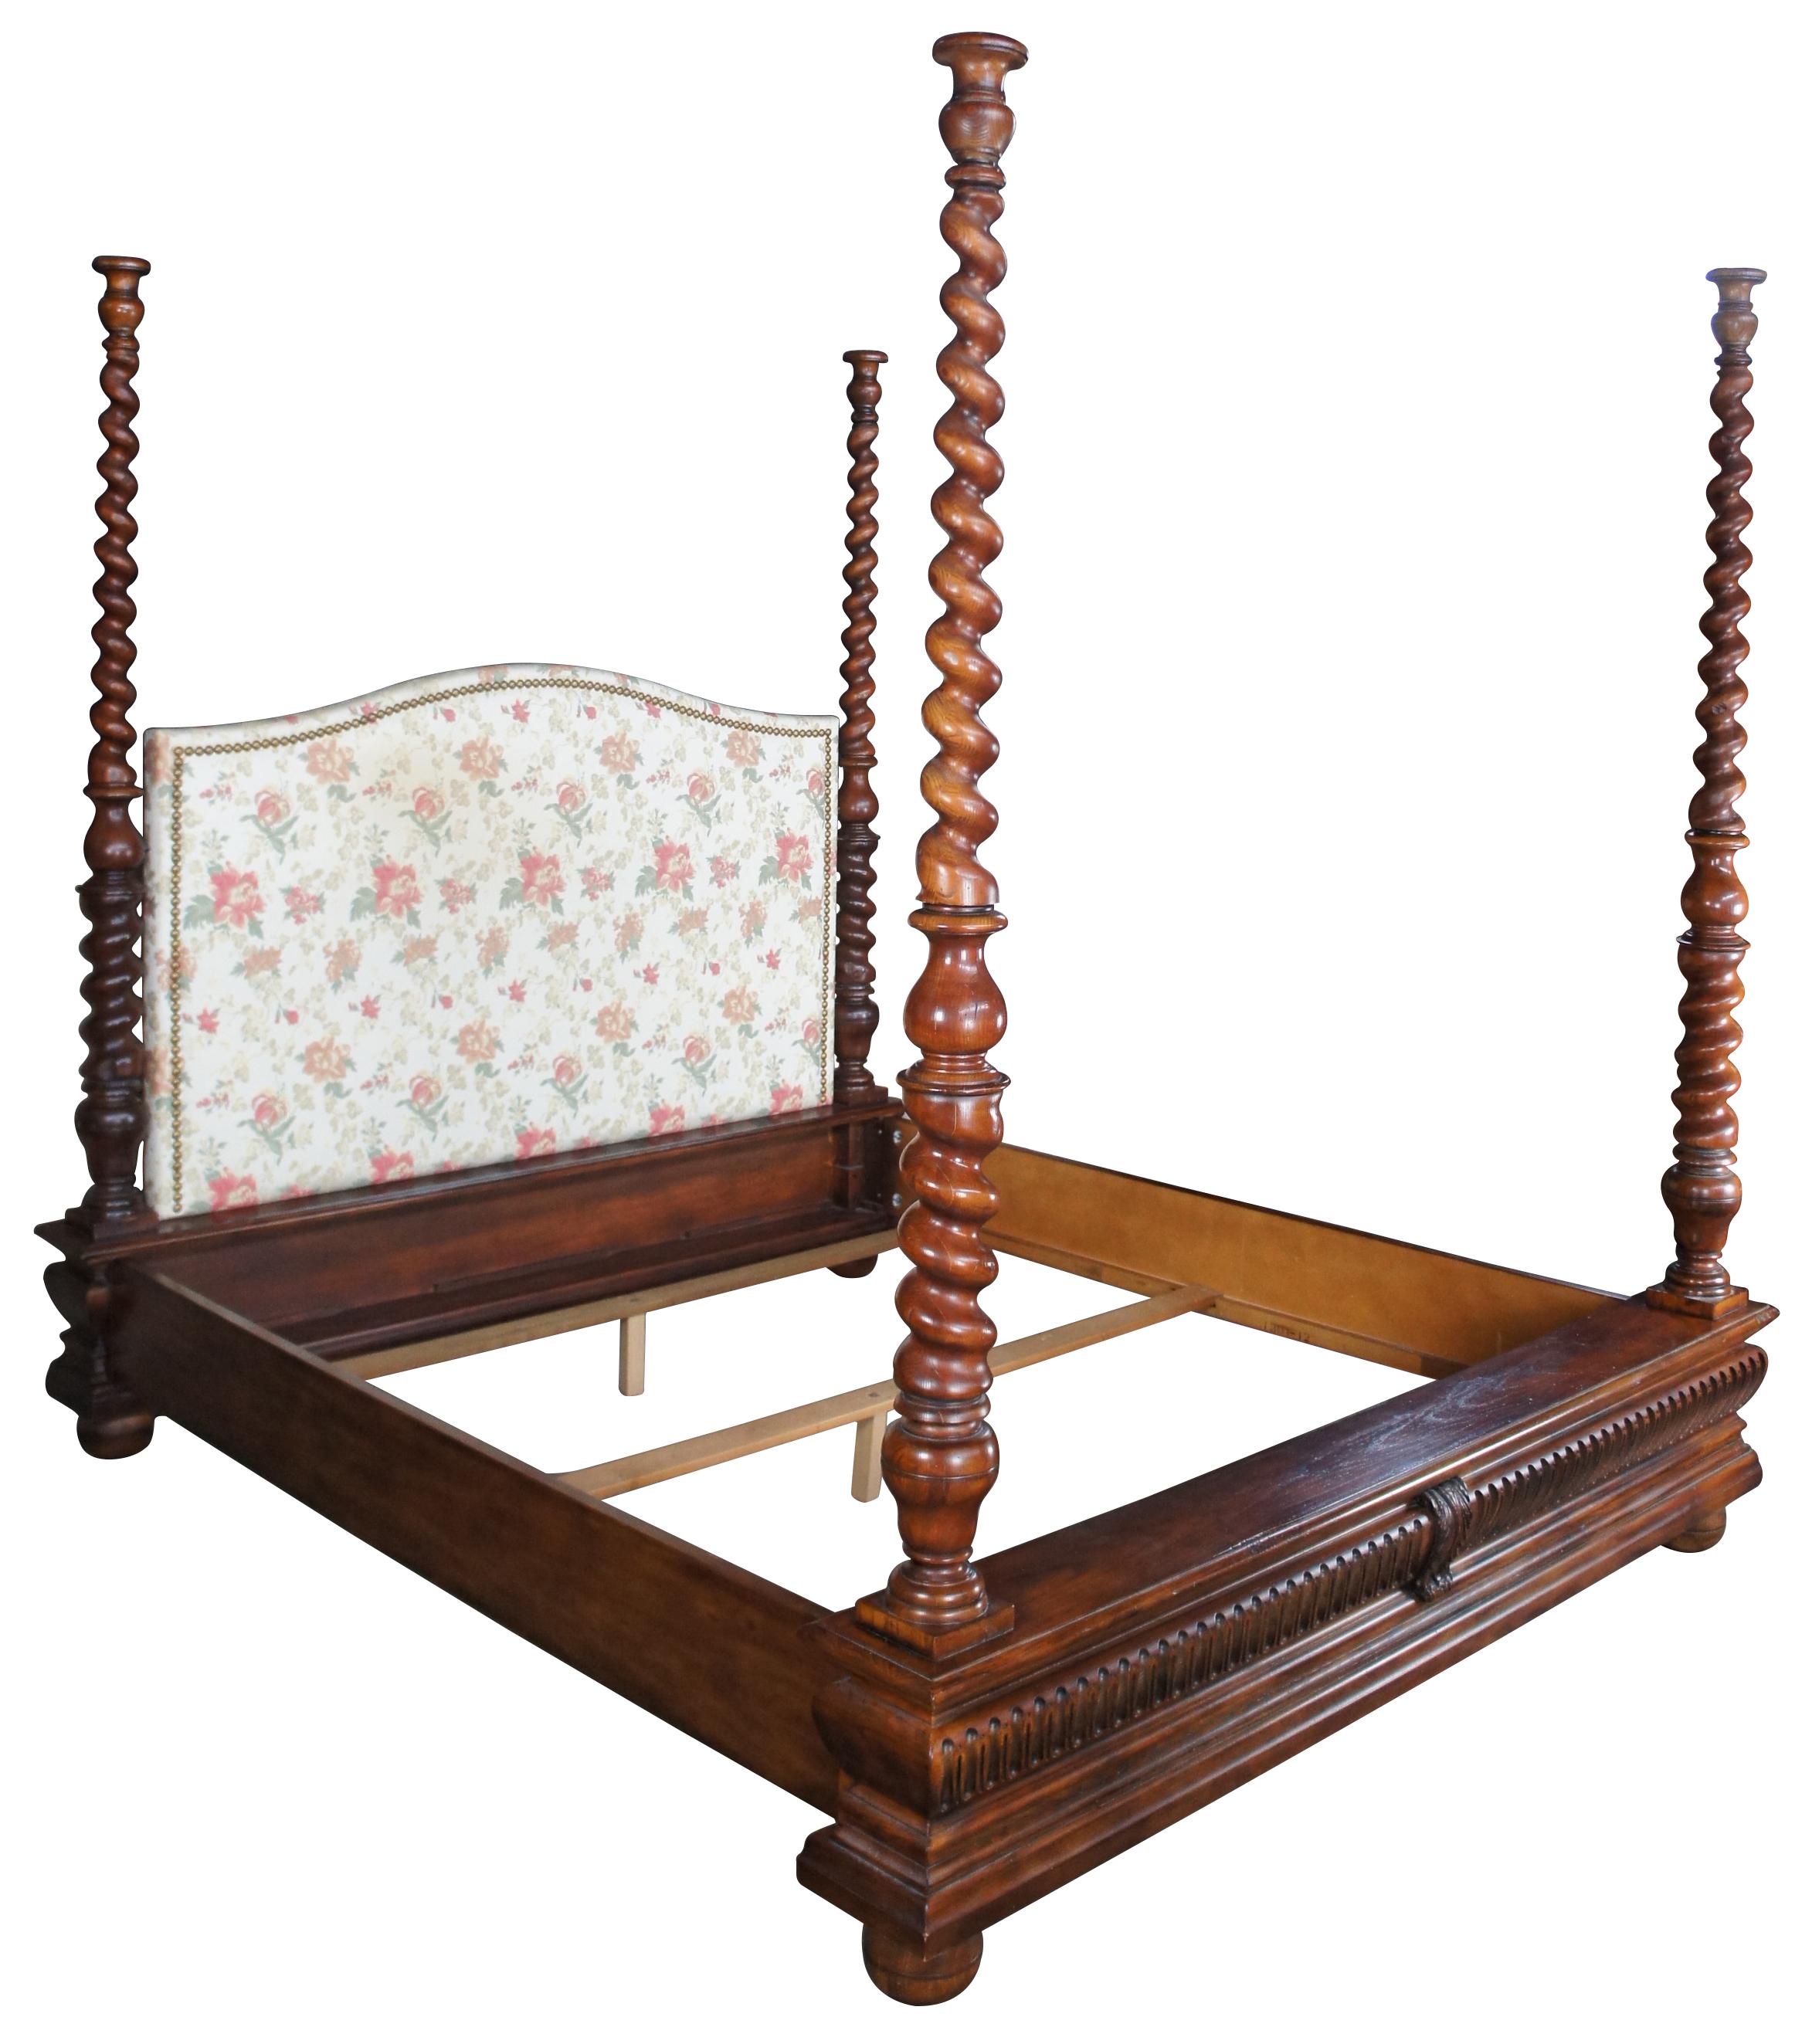 Henredon for Ralph Lauren 1301-12 sheltering sky king size poster bed. Made from oak with British Colonial / West Indies styling. Features ornately carved accents, robust barley twist posts, a floral upholstered camelback headboard with nailhead